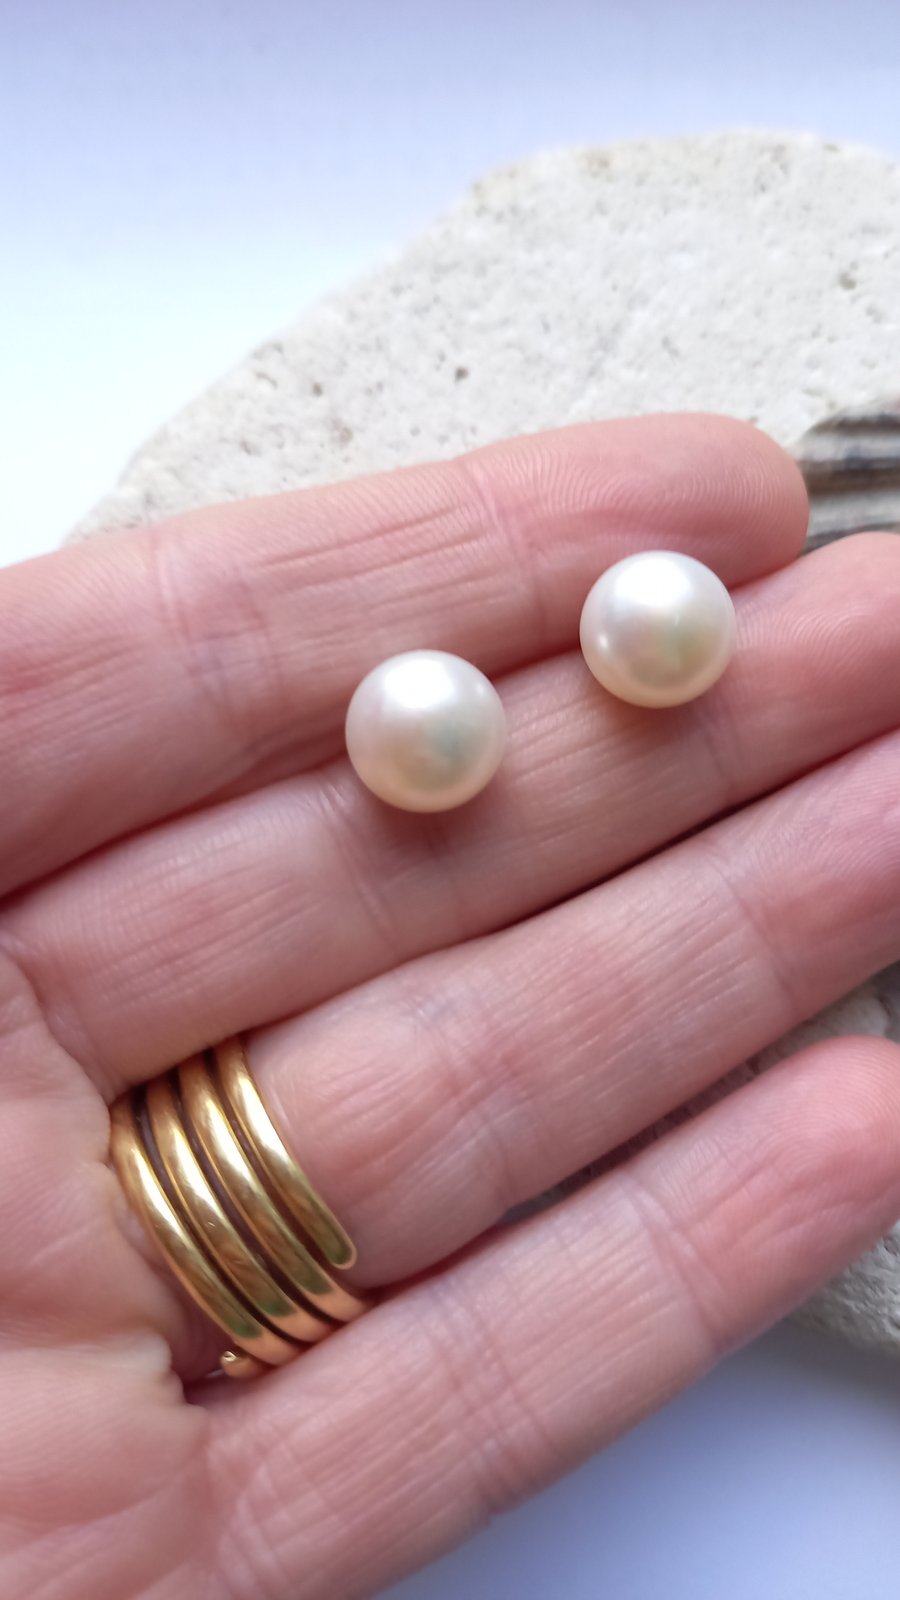 10-11mm Ivory White Freshwater Pearl Earrings with Sterling Silver